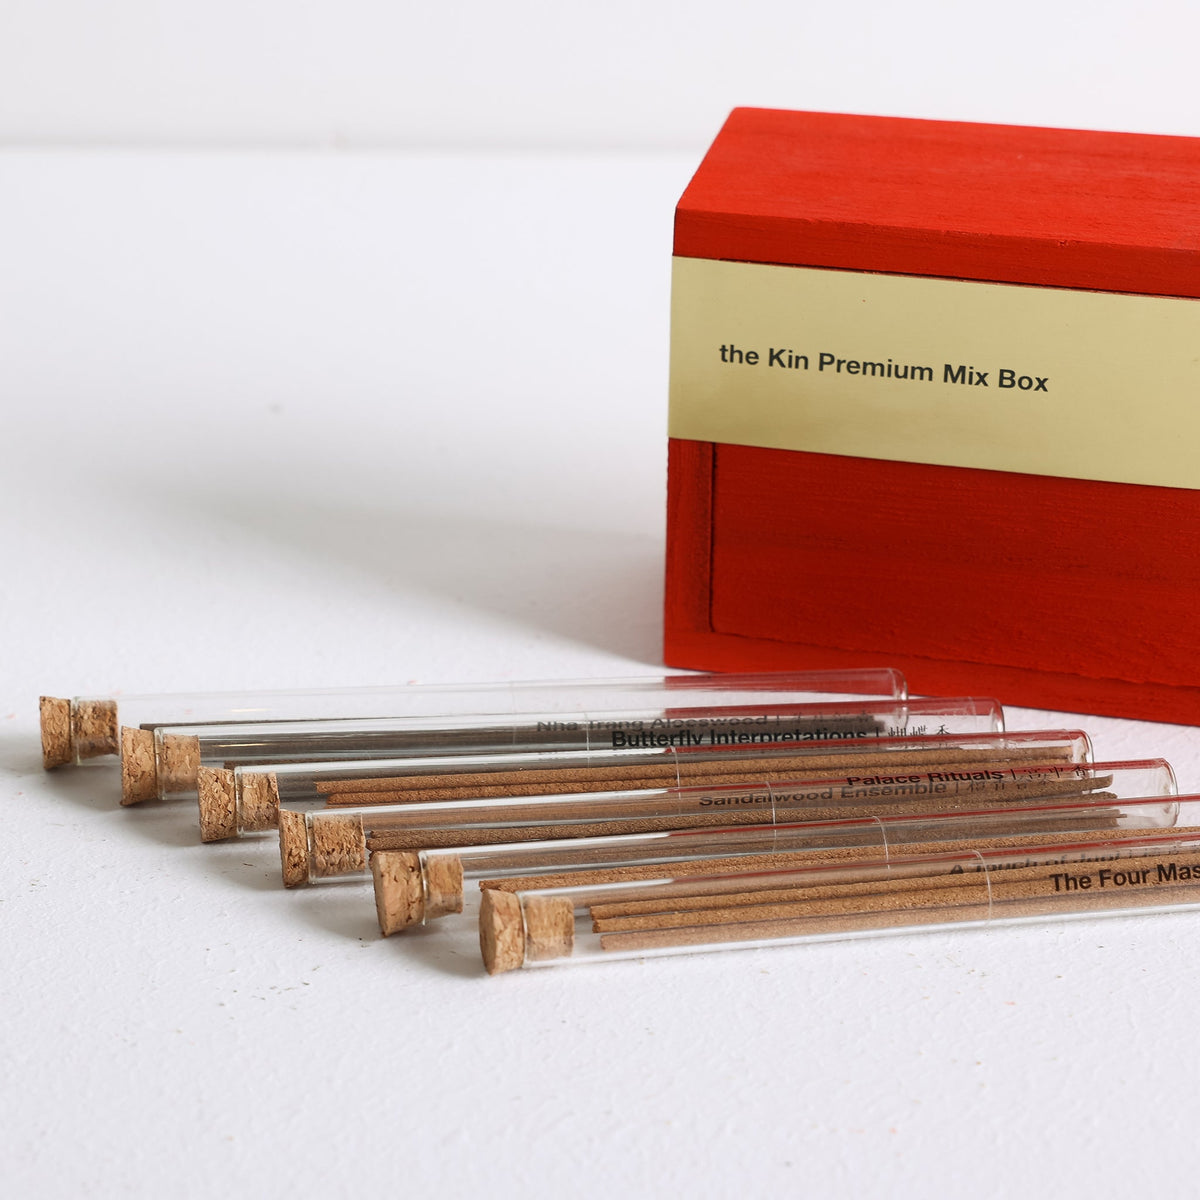 A mixed box of handmade incense sticks by Kin Objects